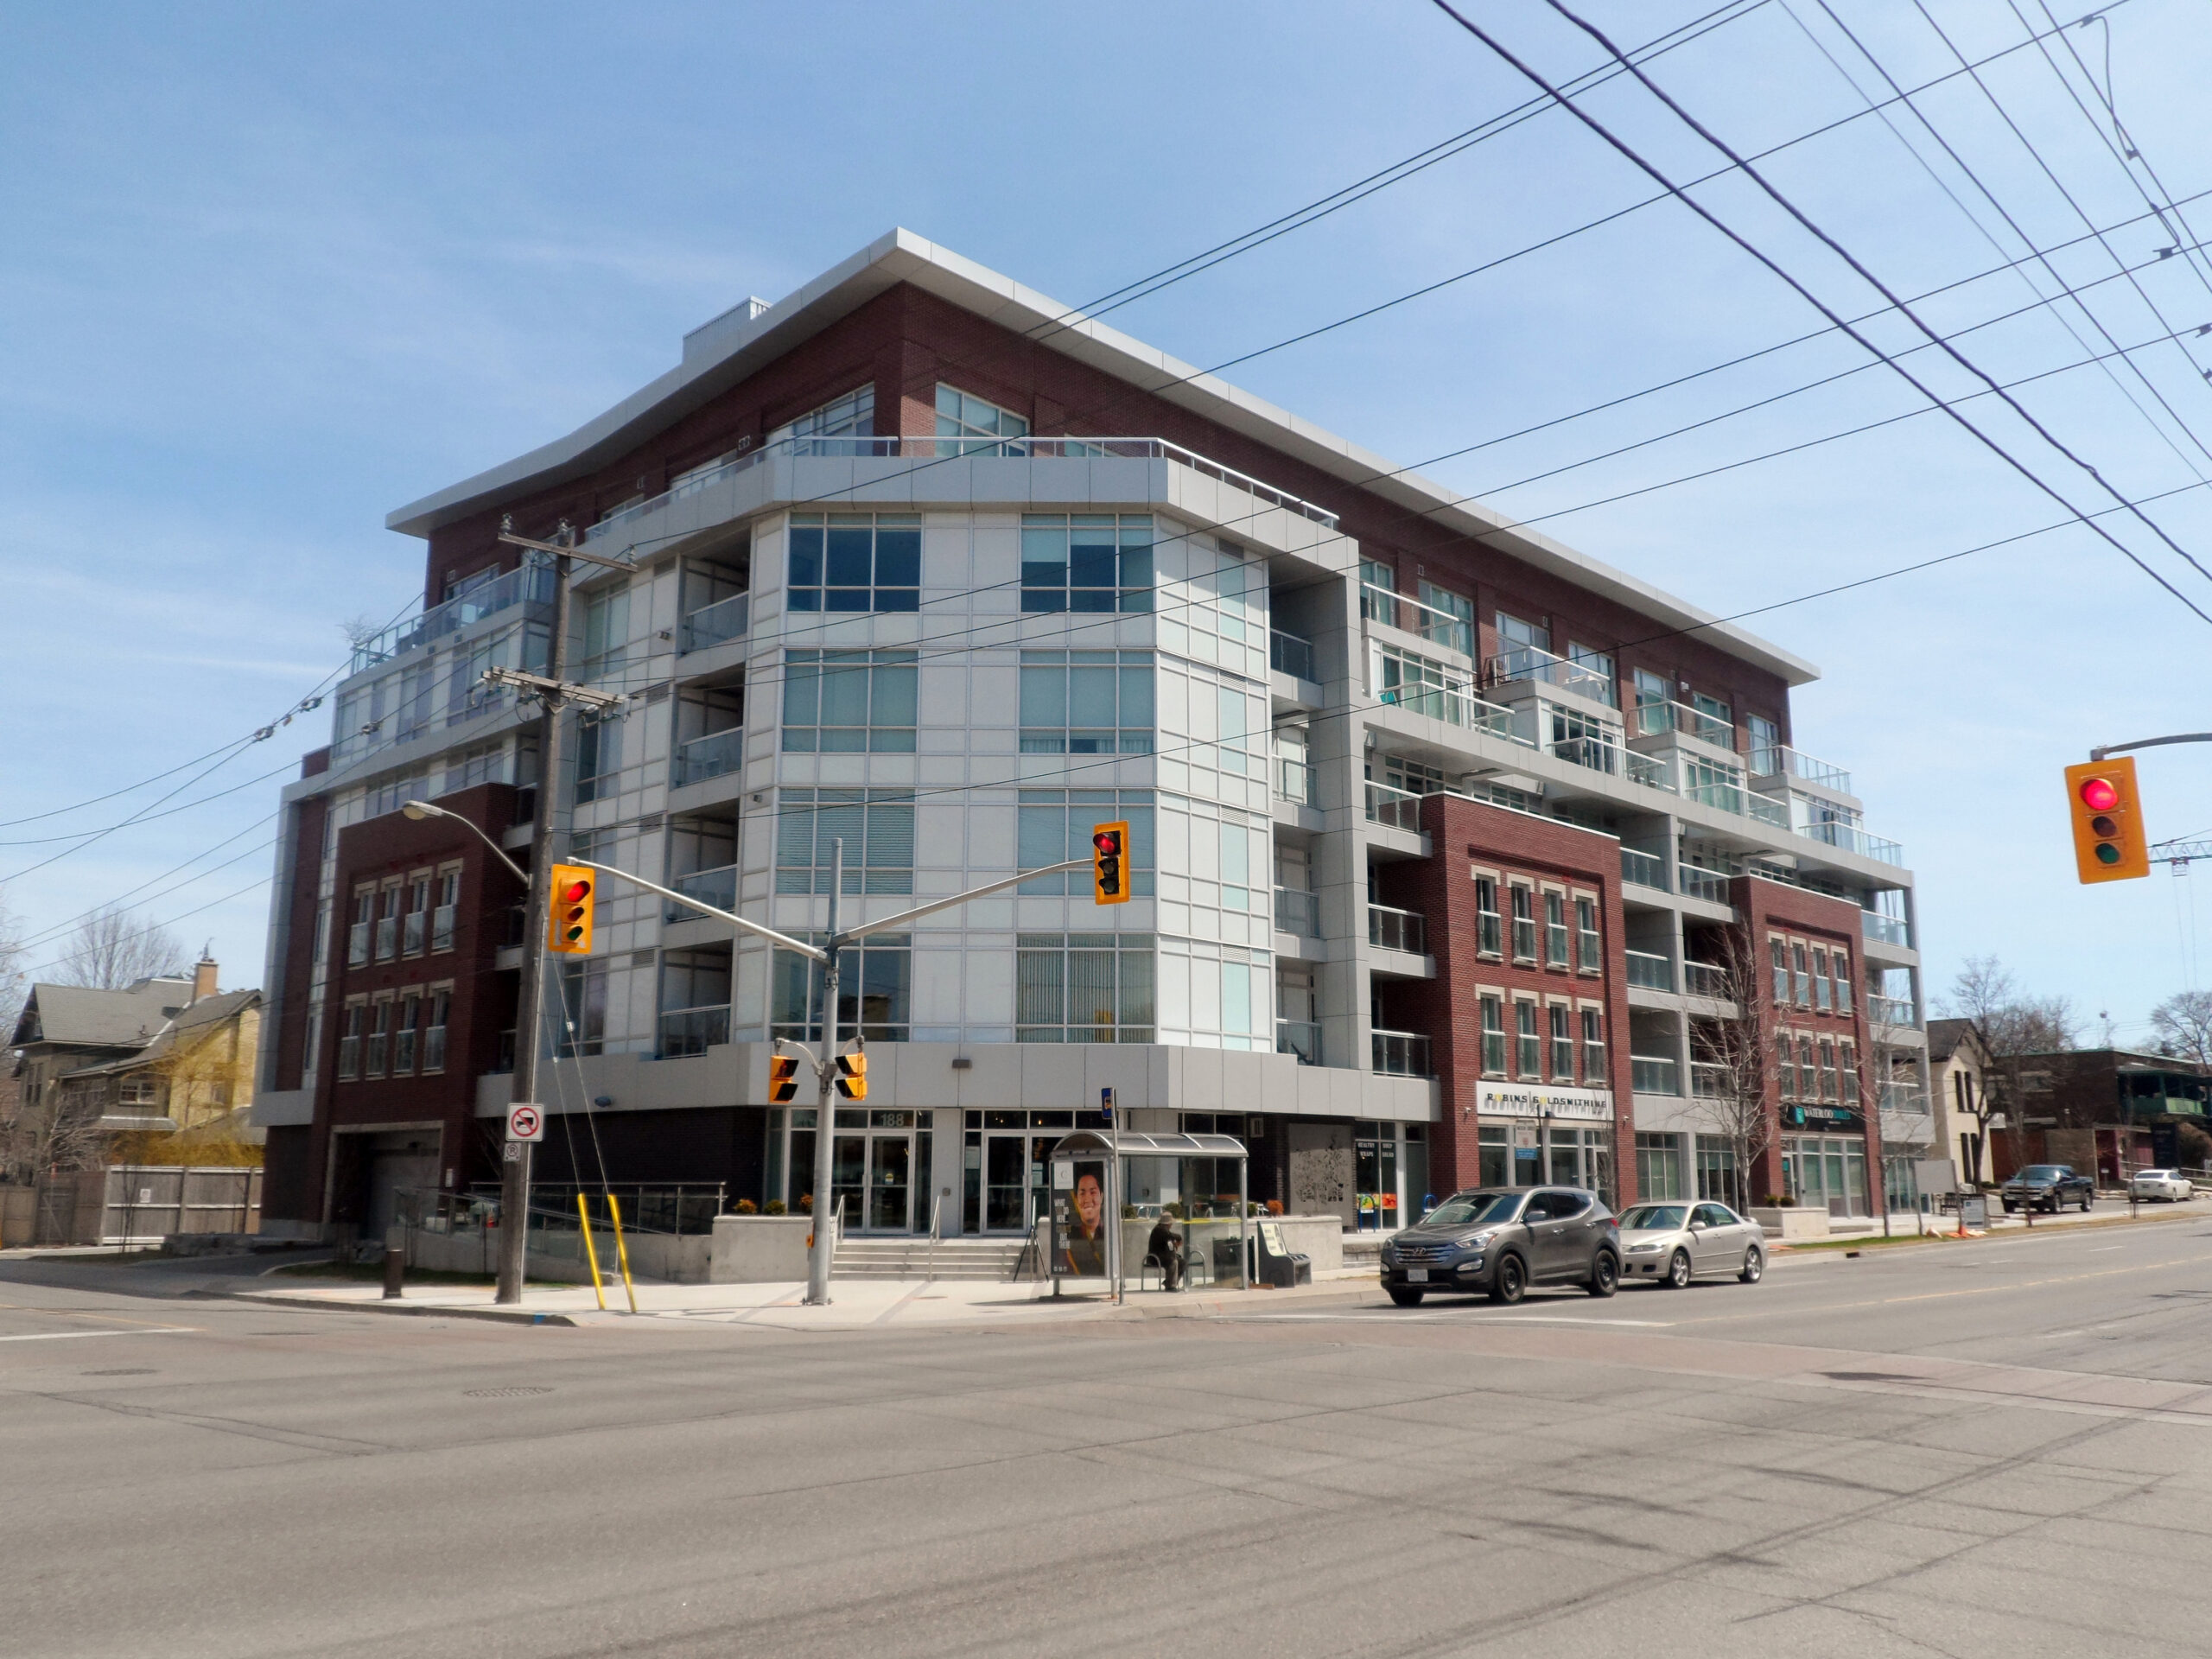 188 King Street S (Unit A), Waterloo | Prime Endcap Retail Unit Available for Sub-Lease